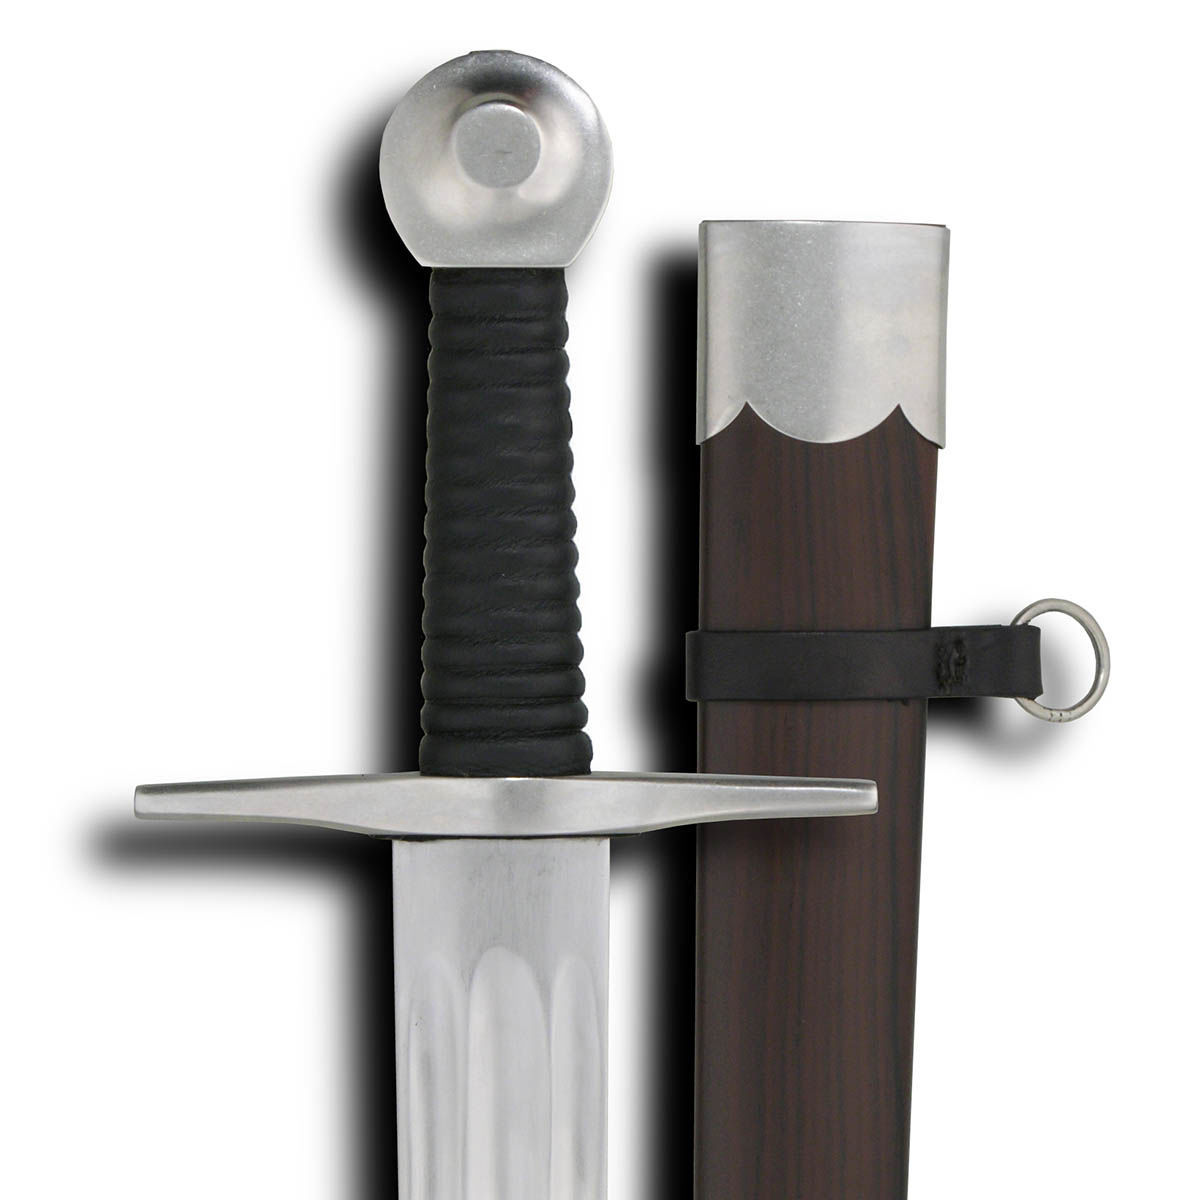 Practical Marshall Single Hand Practice Sword Includes Glass Filled Resin Scabbard